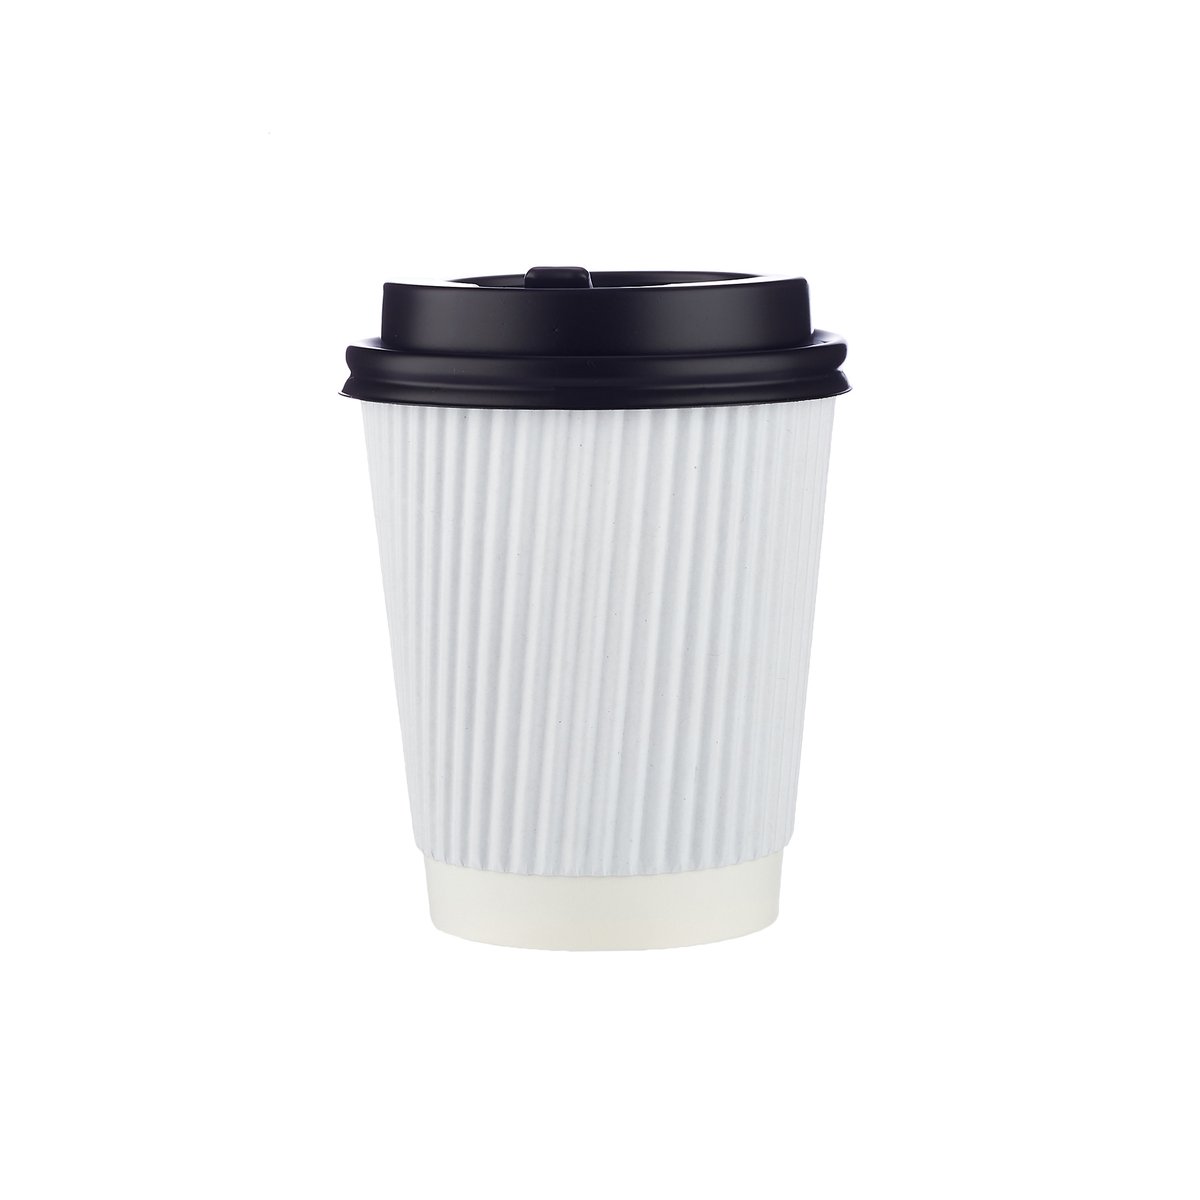 Hotpack White Ripple Paper Cup With Lids Capacity 8oz 10pcs